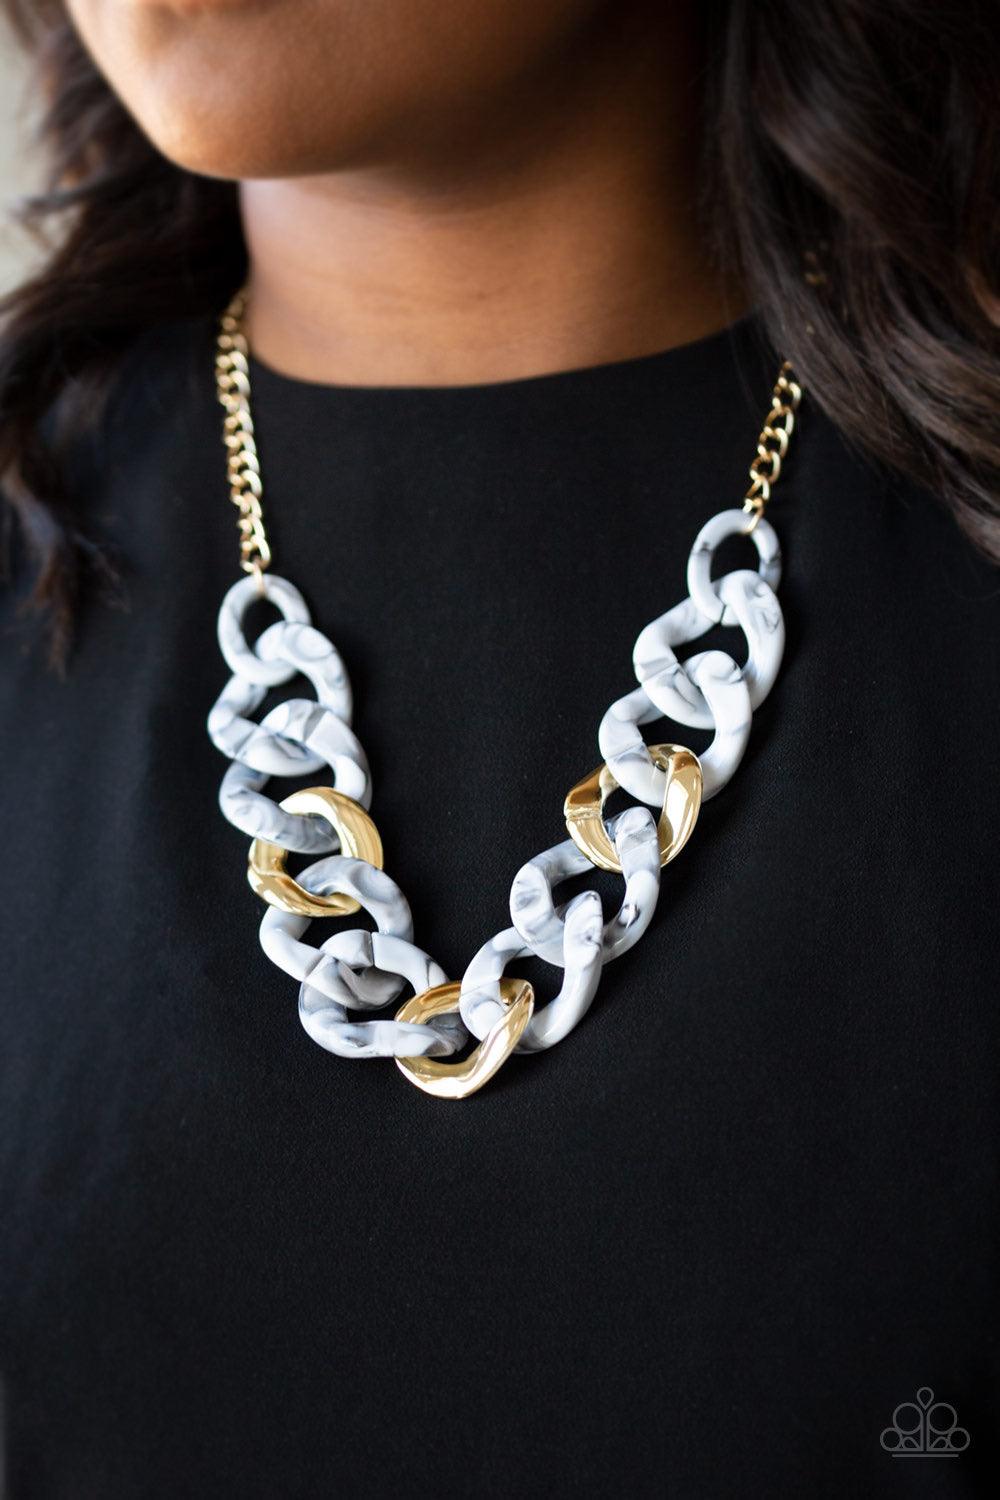 Paparazzi Accessories I Have a HAUTE Date - White Featuring a faux marble finish, smoky white acrylic links connect with shiny metallic links below the collar for a colorful statement-making look. Features an adjustable clasp closure. Jewelry